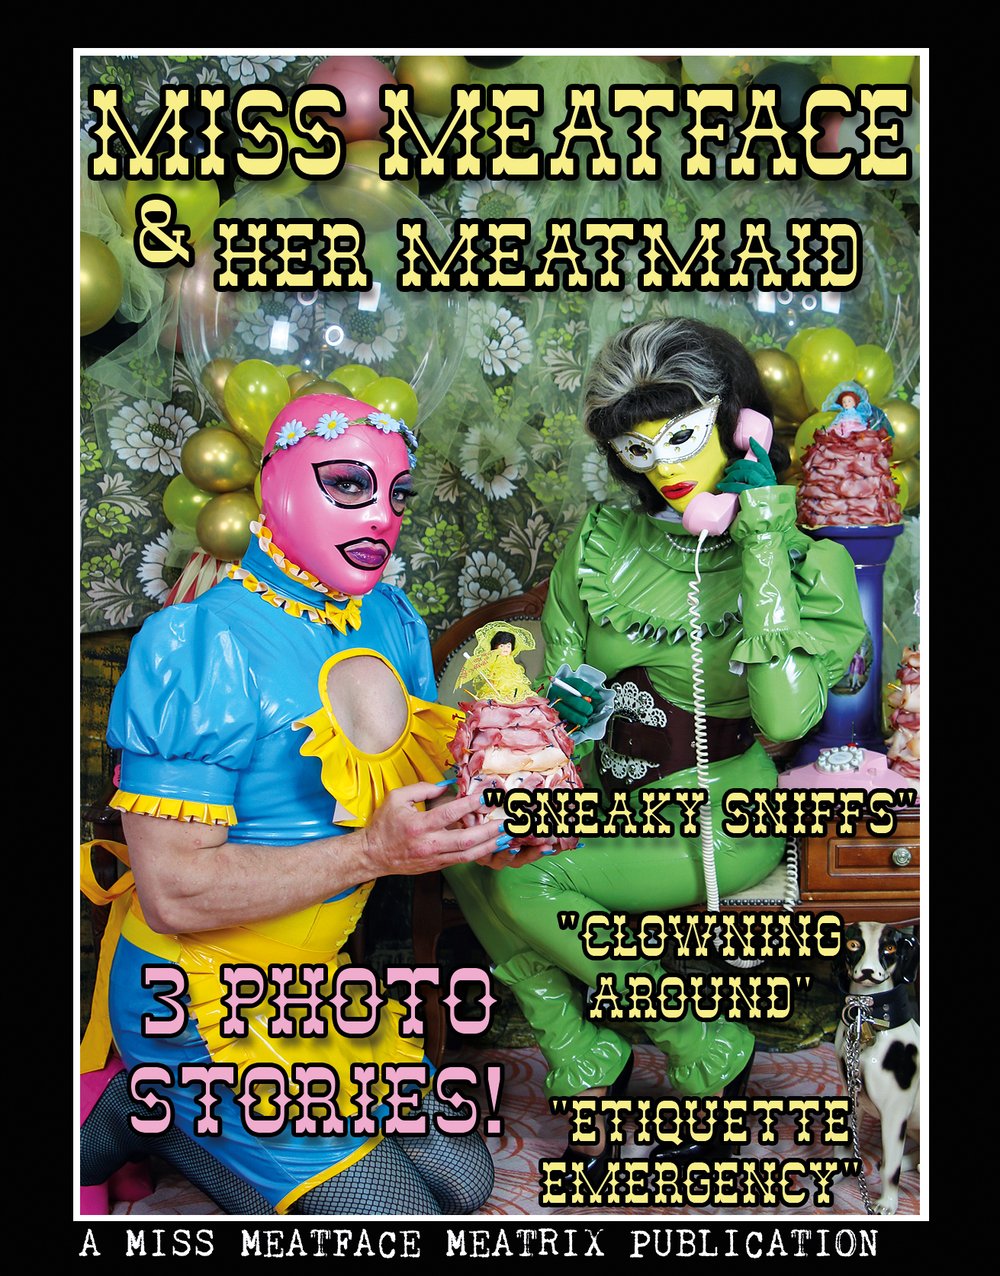 NEW! 'MISS MEATFACE & HER MEATMAID' PHOTO STORY BOOKLET! 